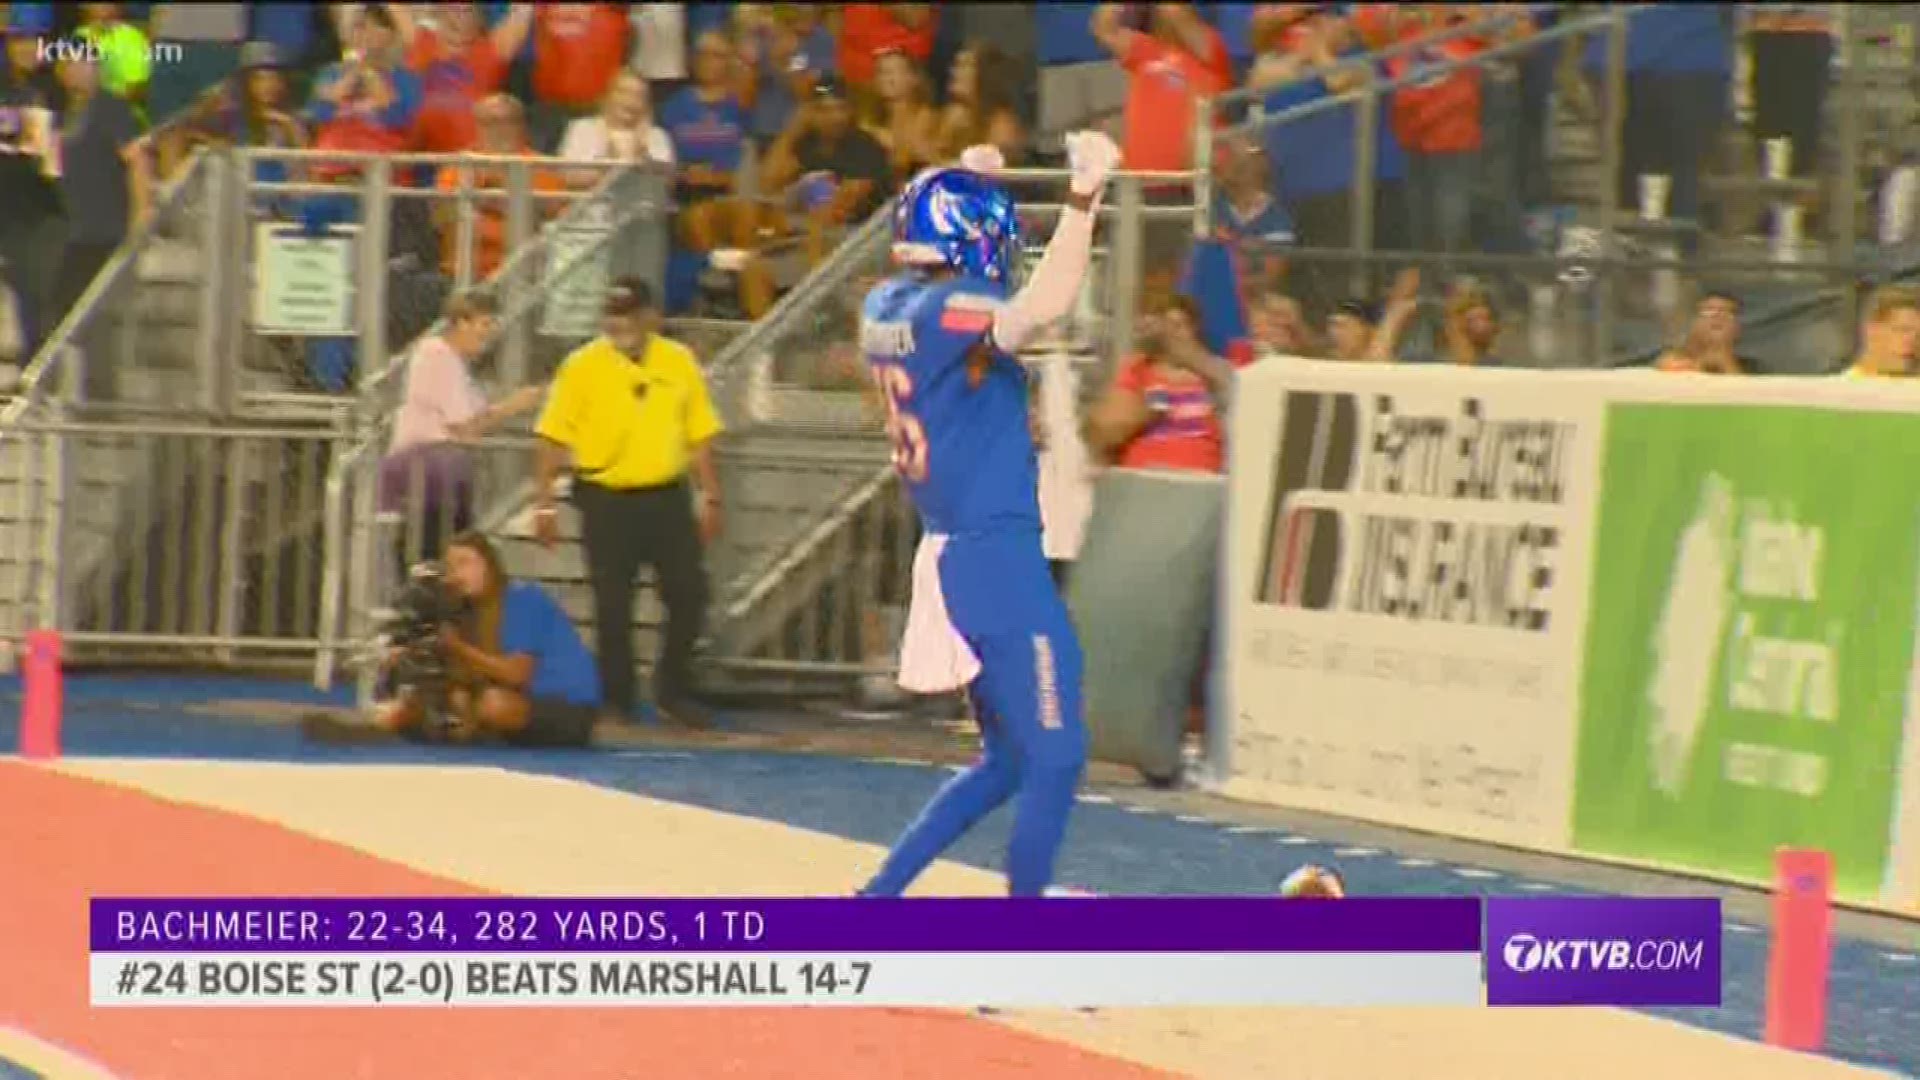 While the Broncos' 14-7 over the Marshall Thundering Herd wasn't pretty, but Boise State's defense came out swinging in the second half - holding Marshall to 0 - zero - total yards after halftime. Boise State will take on the Portland State Vikings from the FCS on Saturday at Albertsons Stadium.